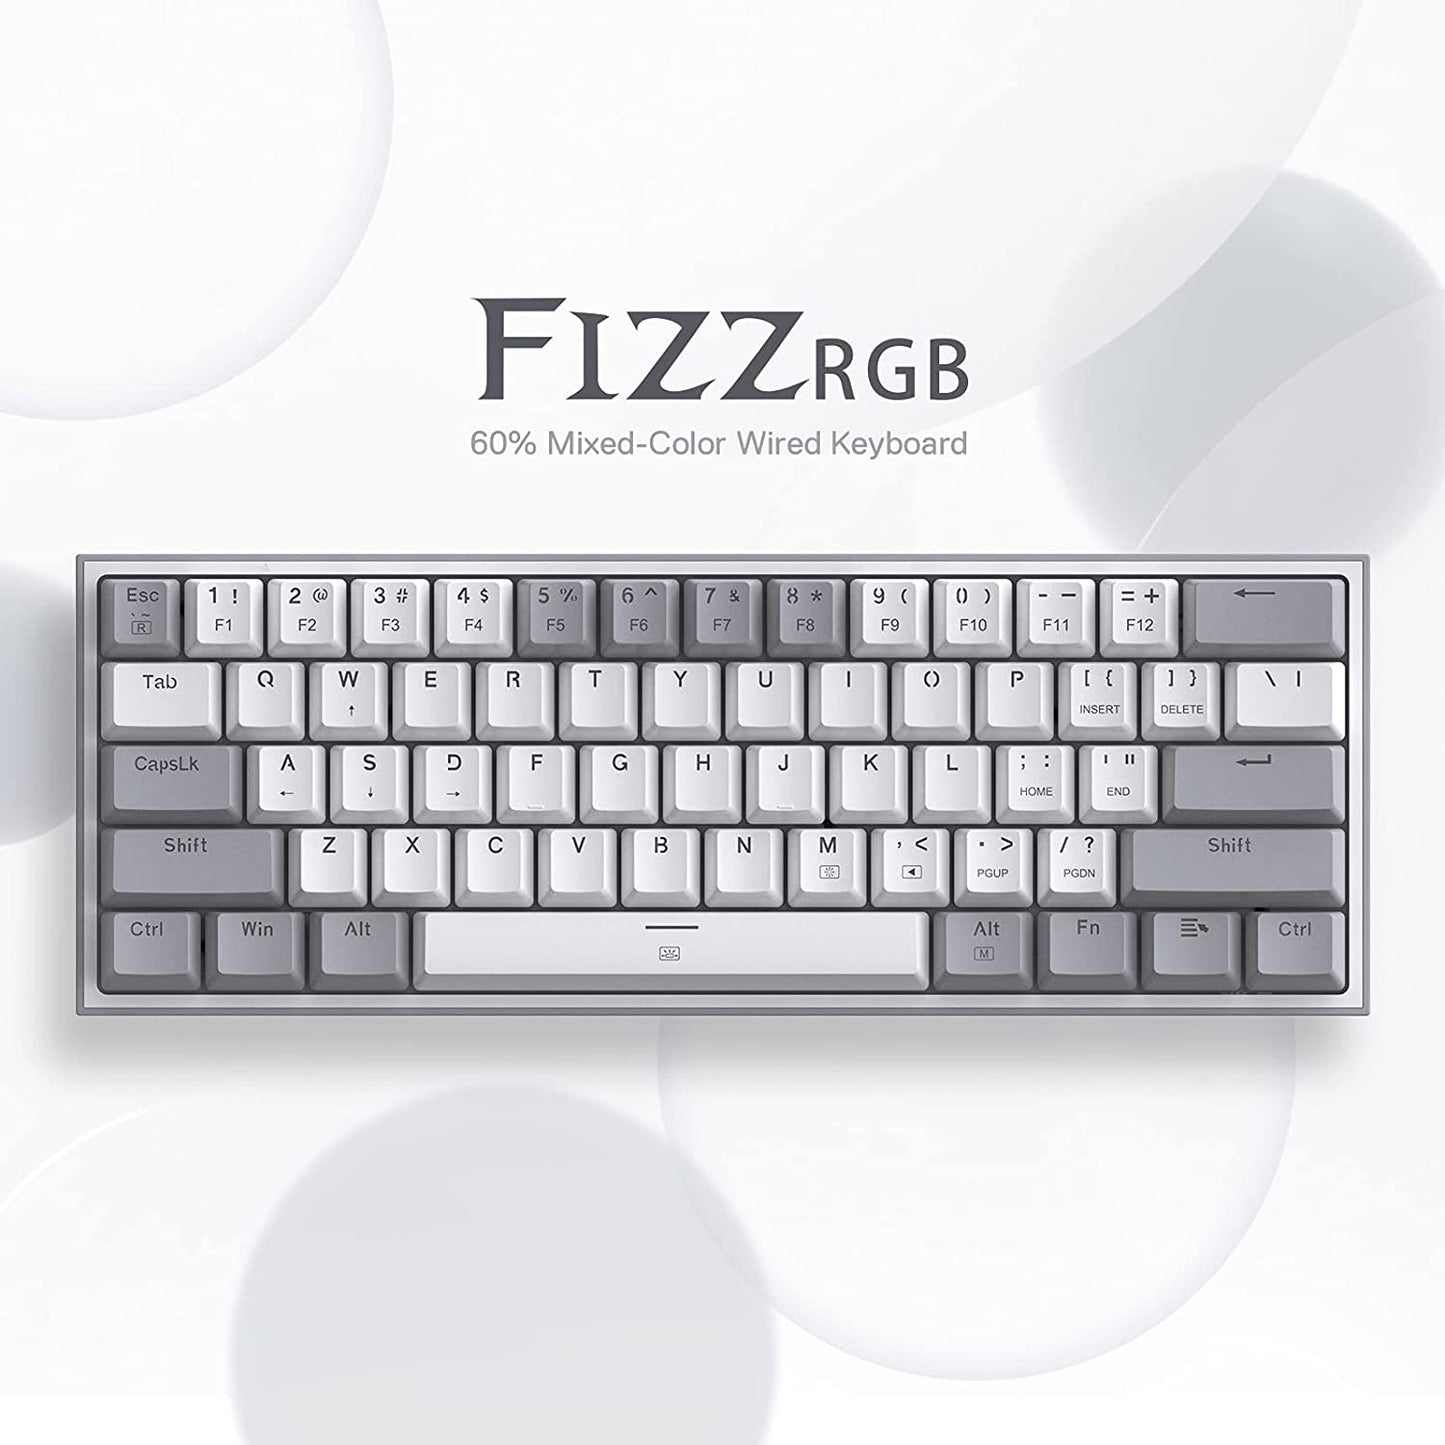 Redragon K617 Fizz 60% Wired RGB Gaming Keyboard, 61 Keys Compact Mechanical Keyboard, Pro Driver/Software Supported